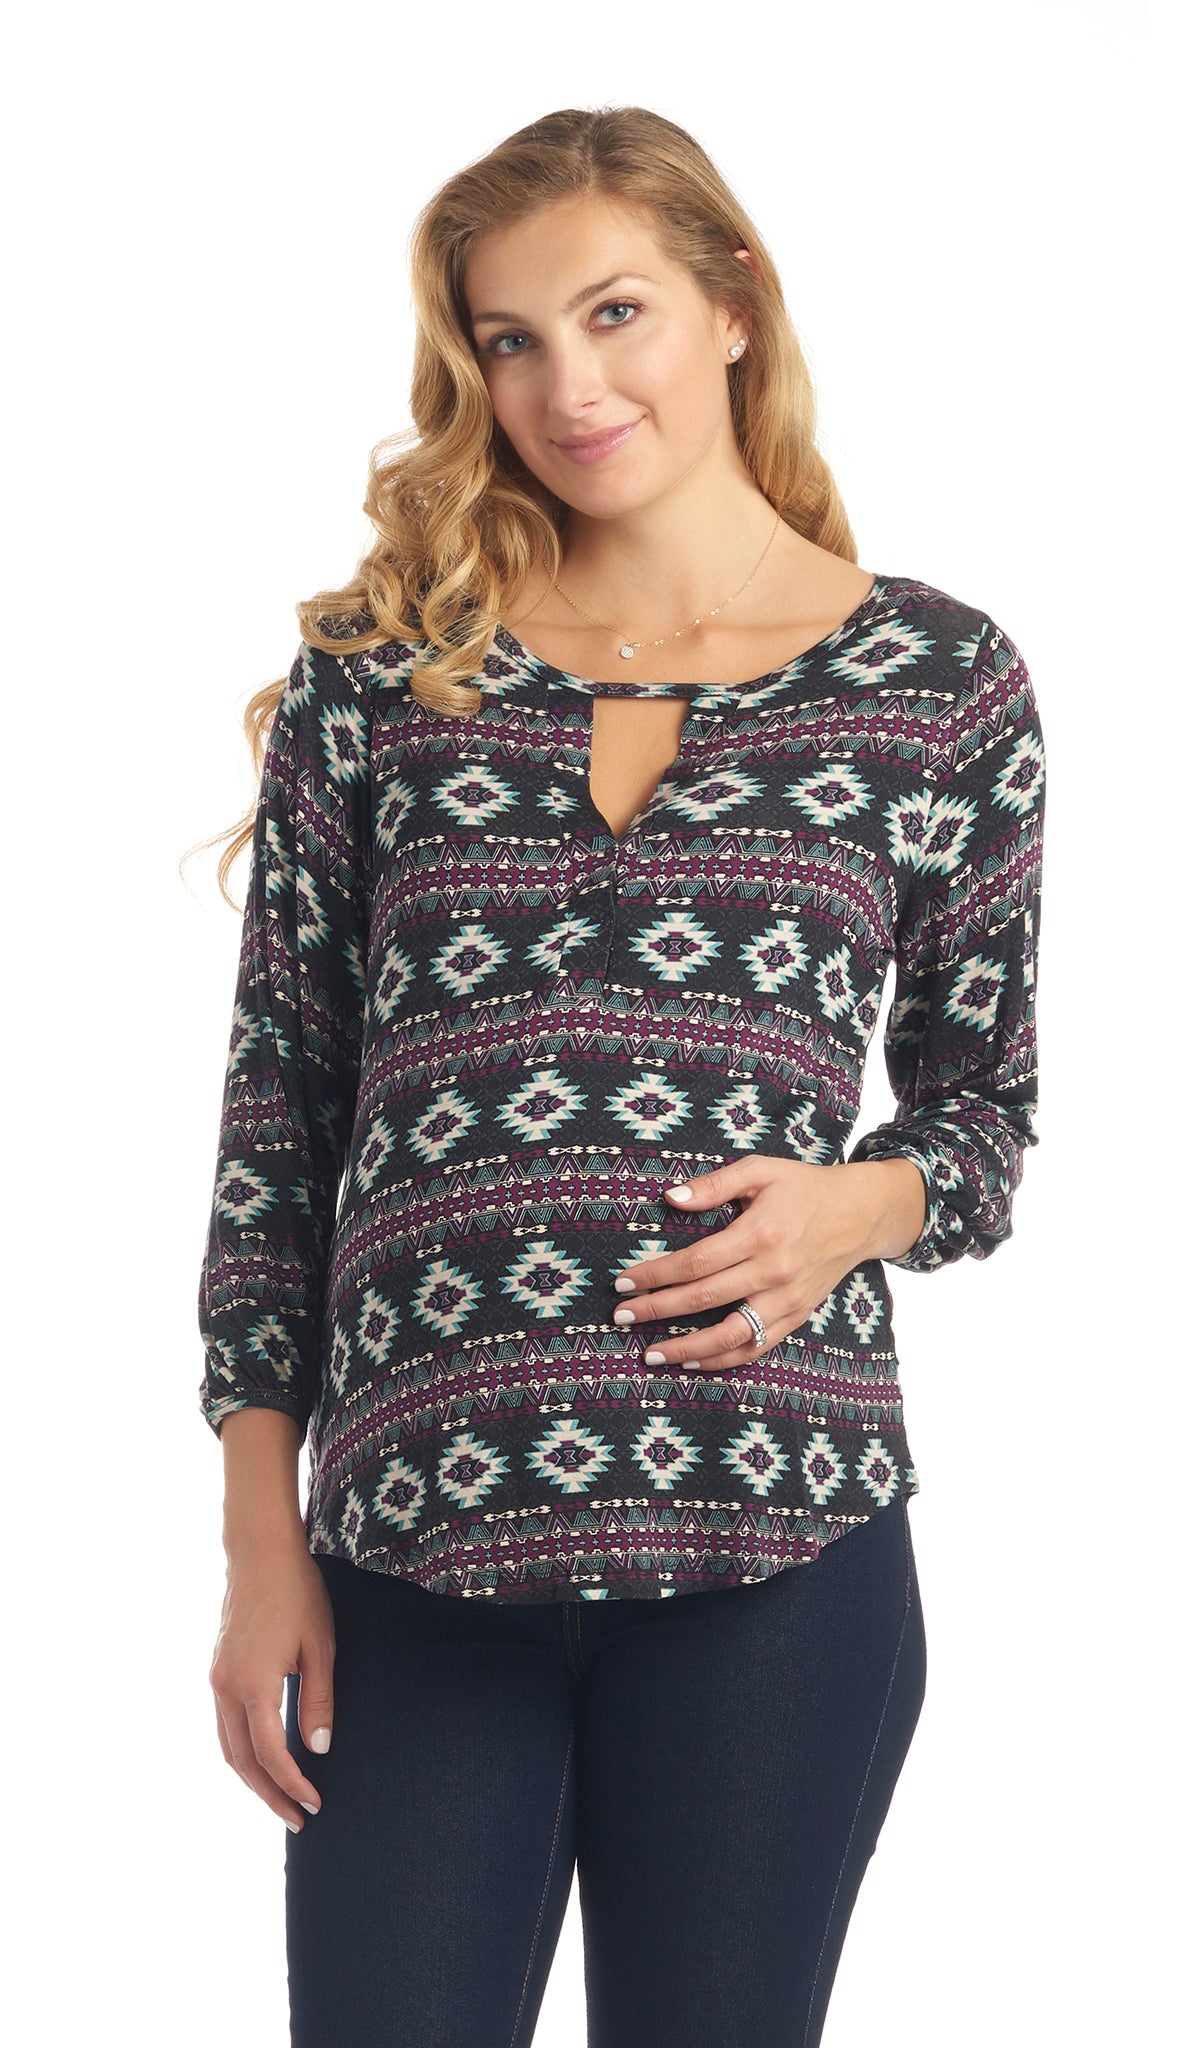 Aztec Purple Lila top worn by pregnant woman with one hand on her belly.